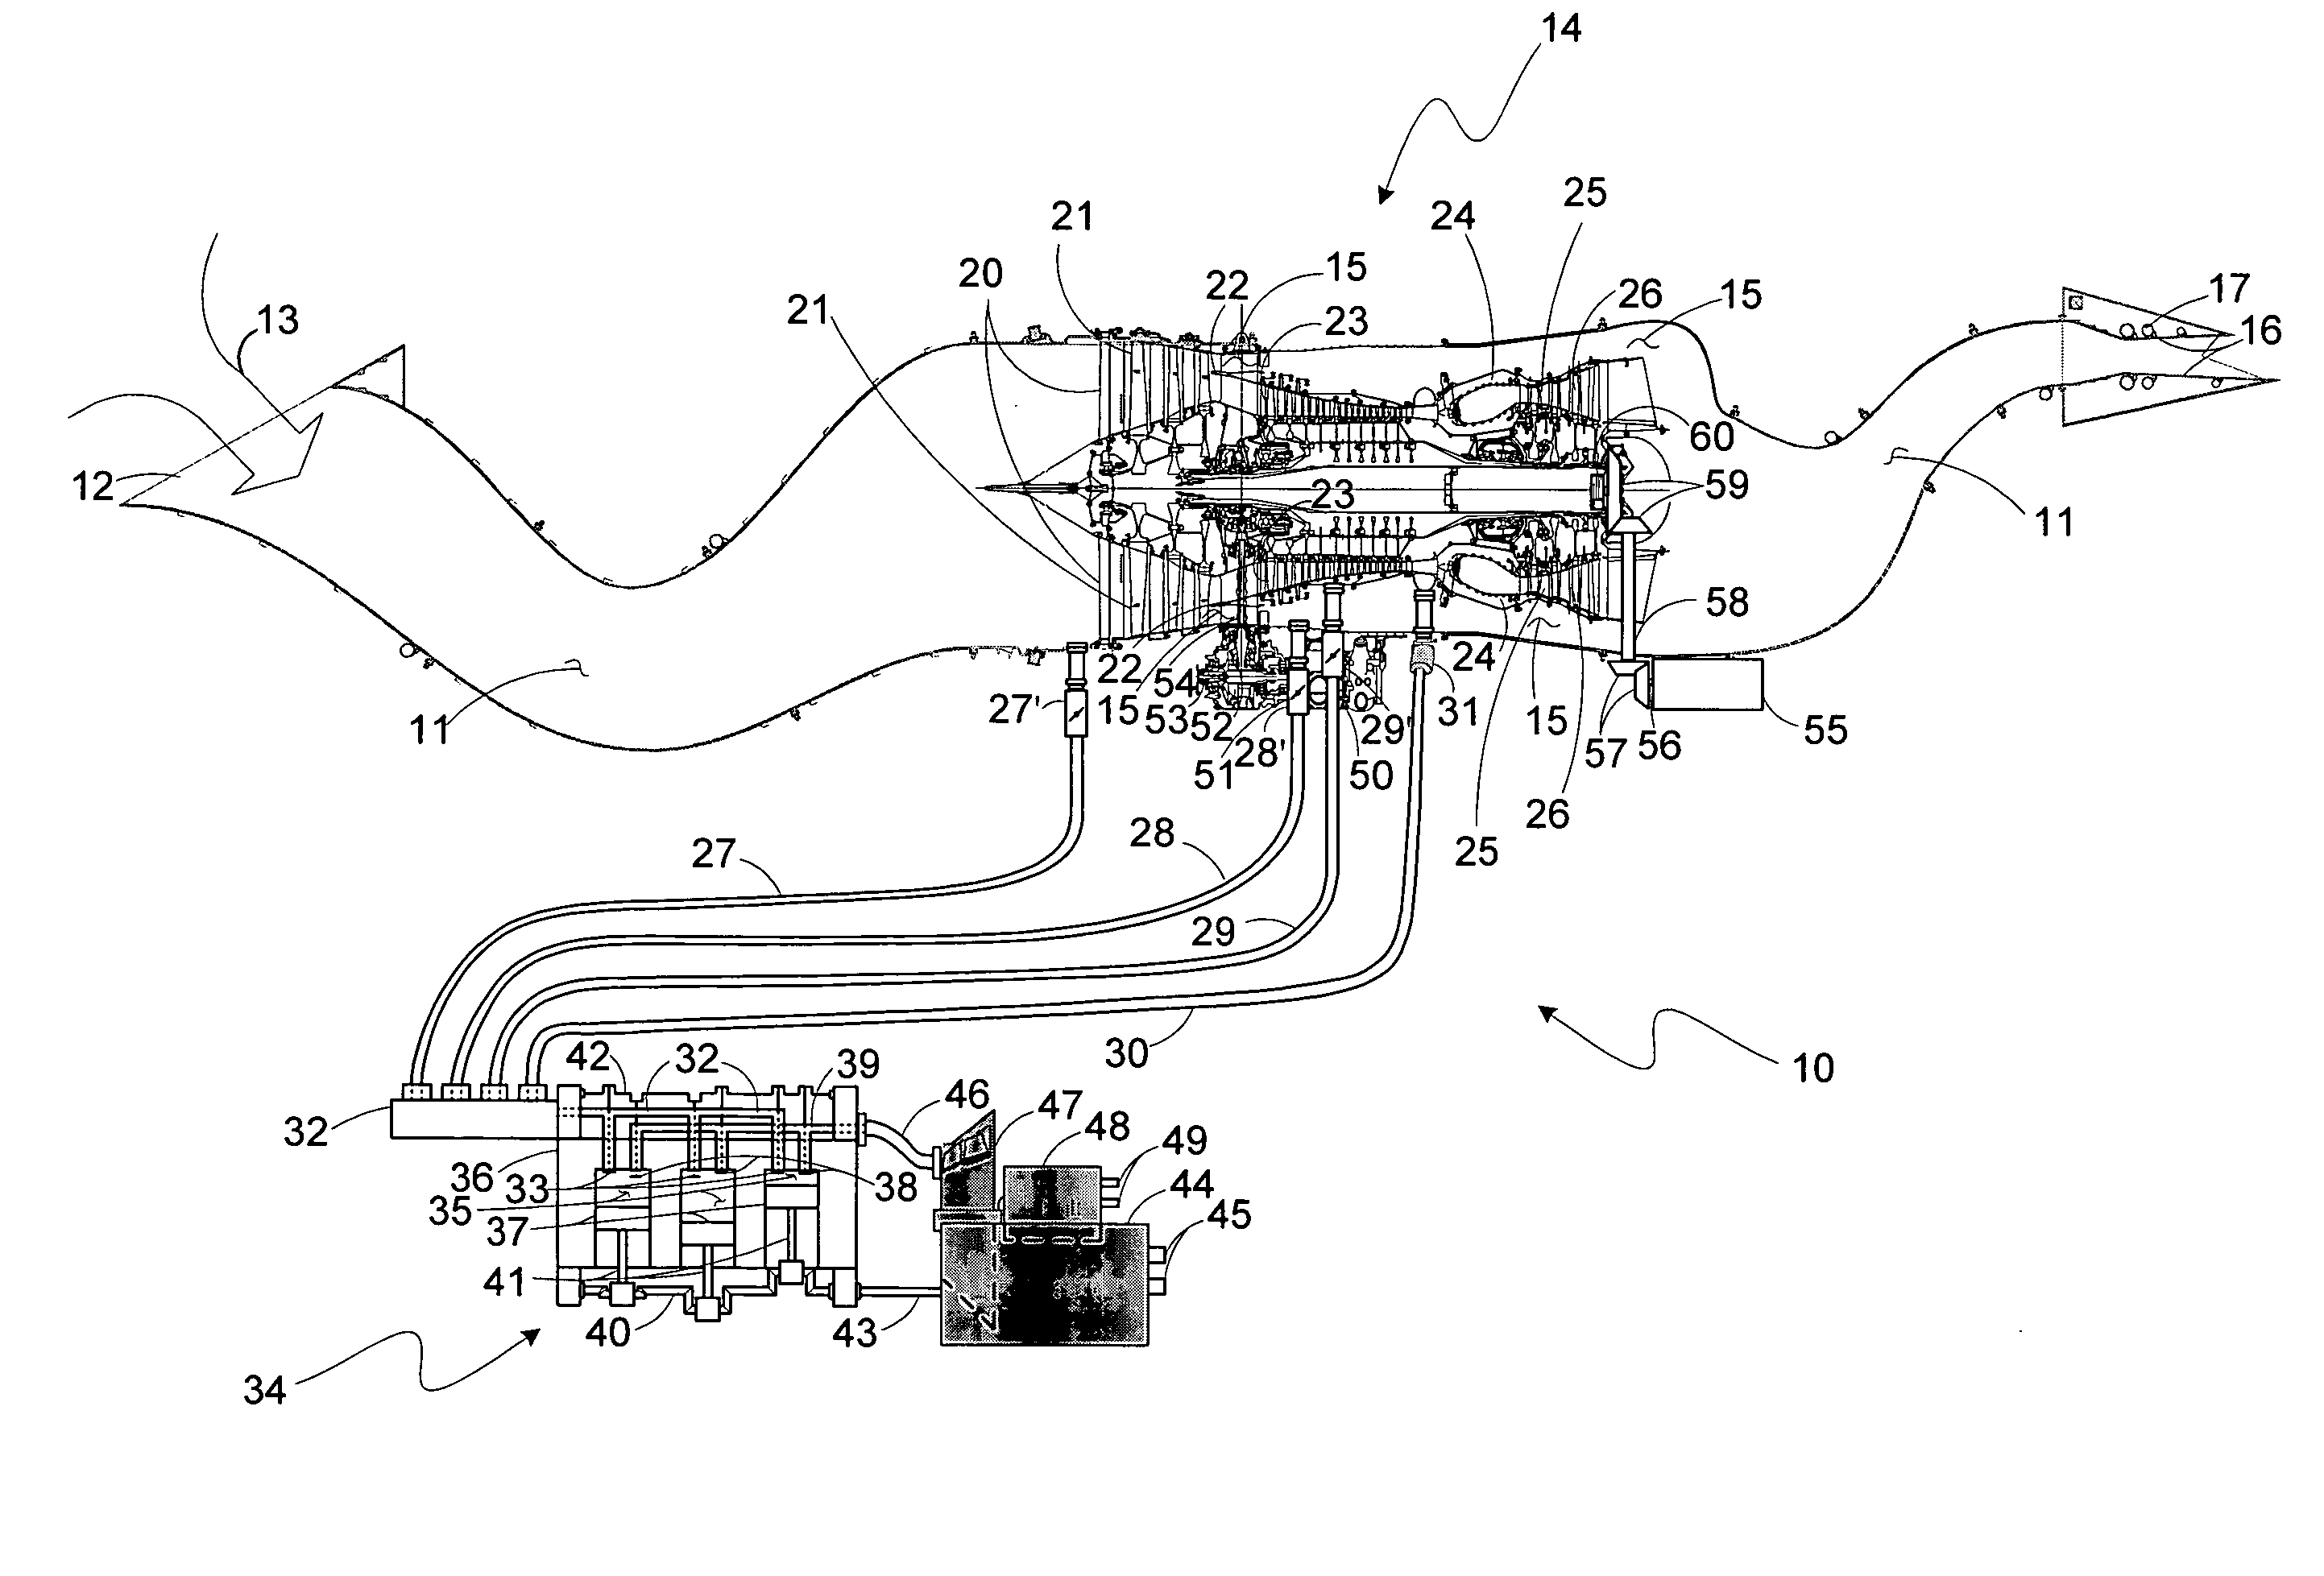 Aircraft combination engines plural airflow conveyances system